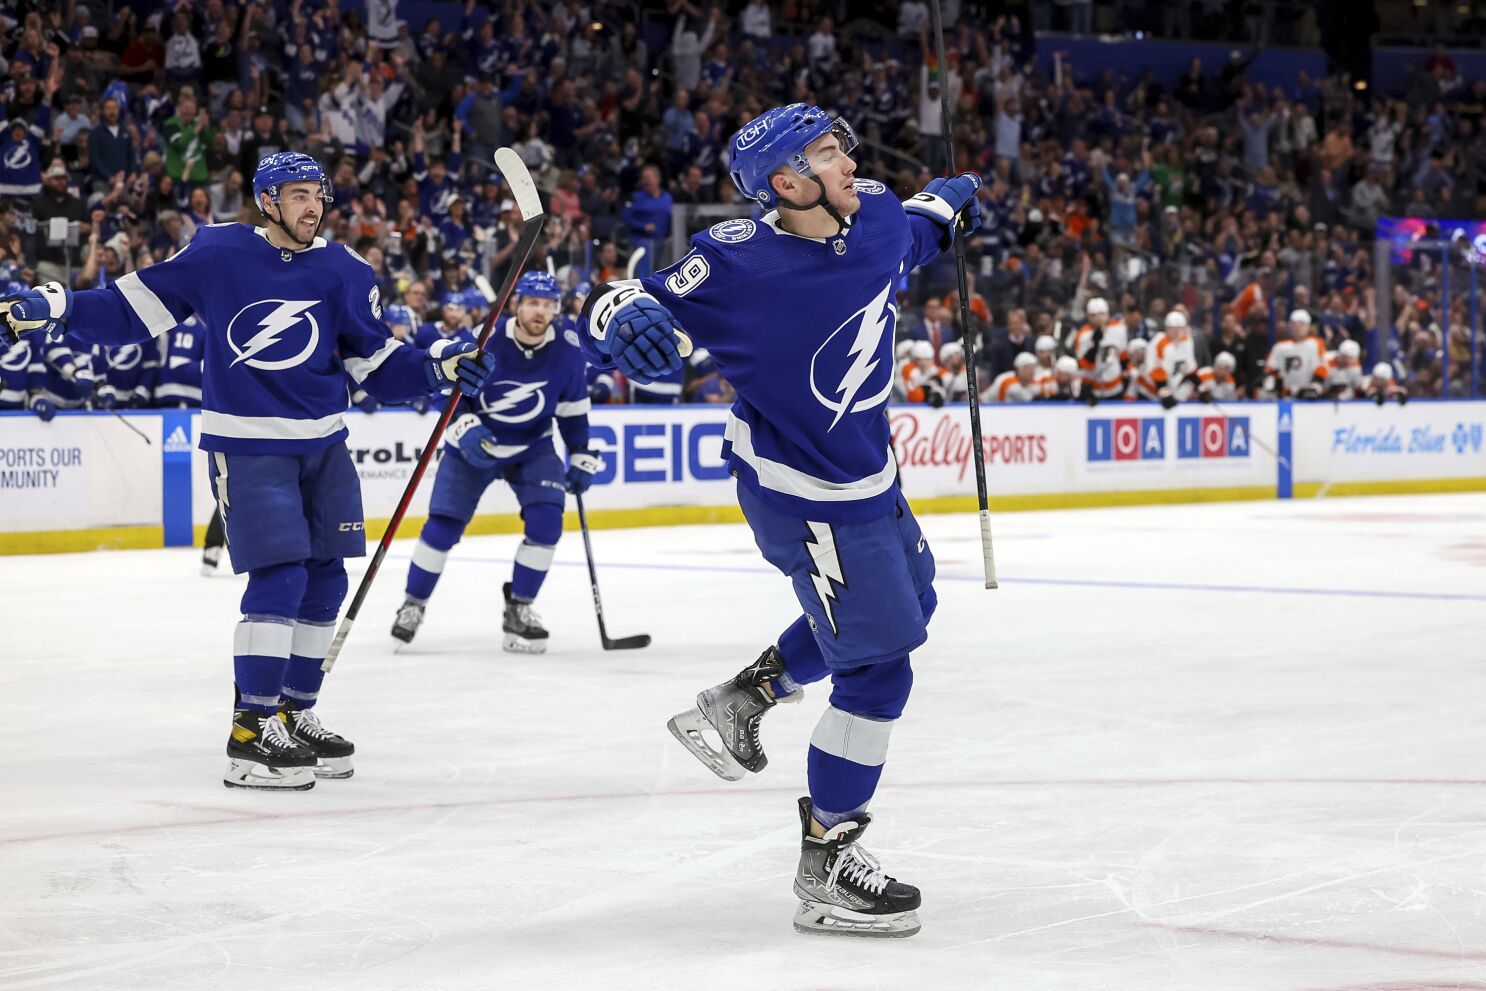 Tampa Bay Lightning strike three times on the power play in their 5-2  defeat of the Flyers